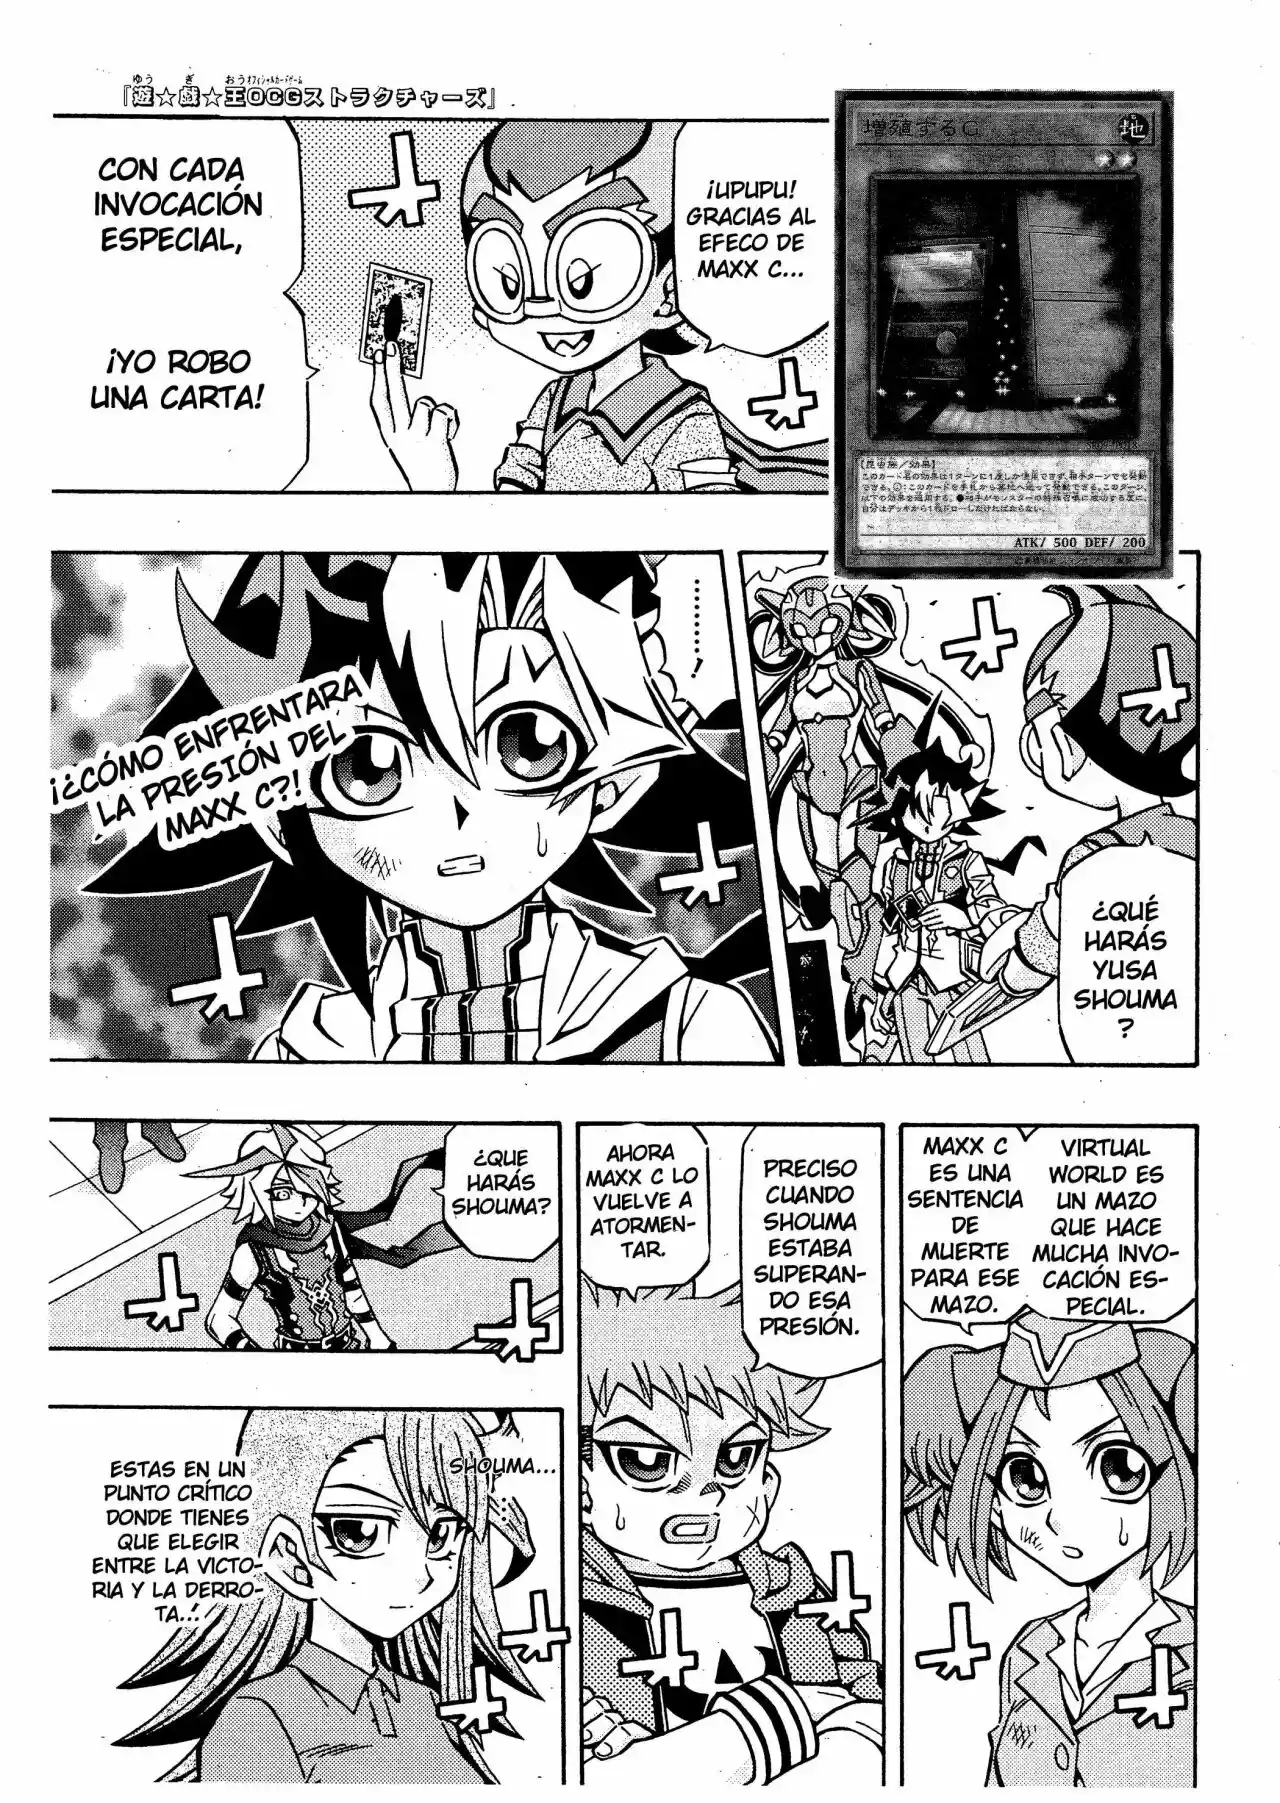 Yu-Gi-Oh! OCG Structures: Chapter 16 - Page 1